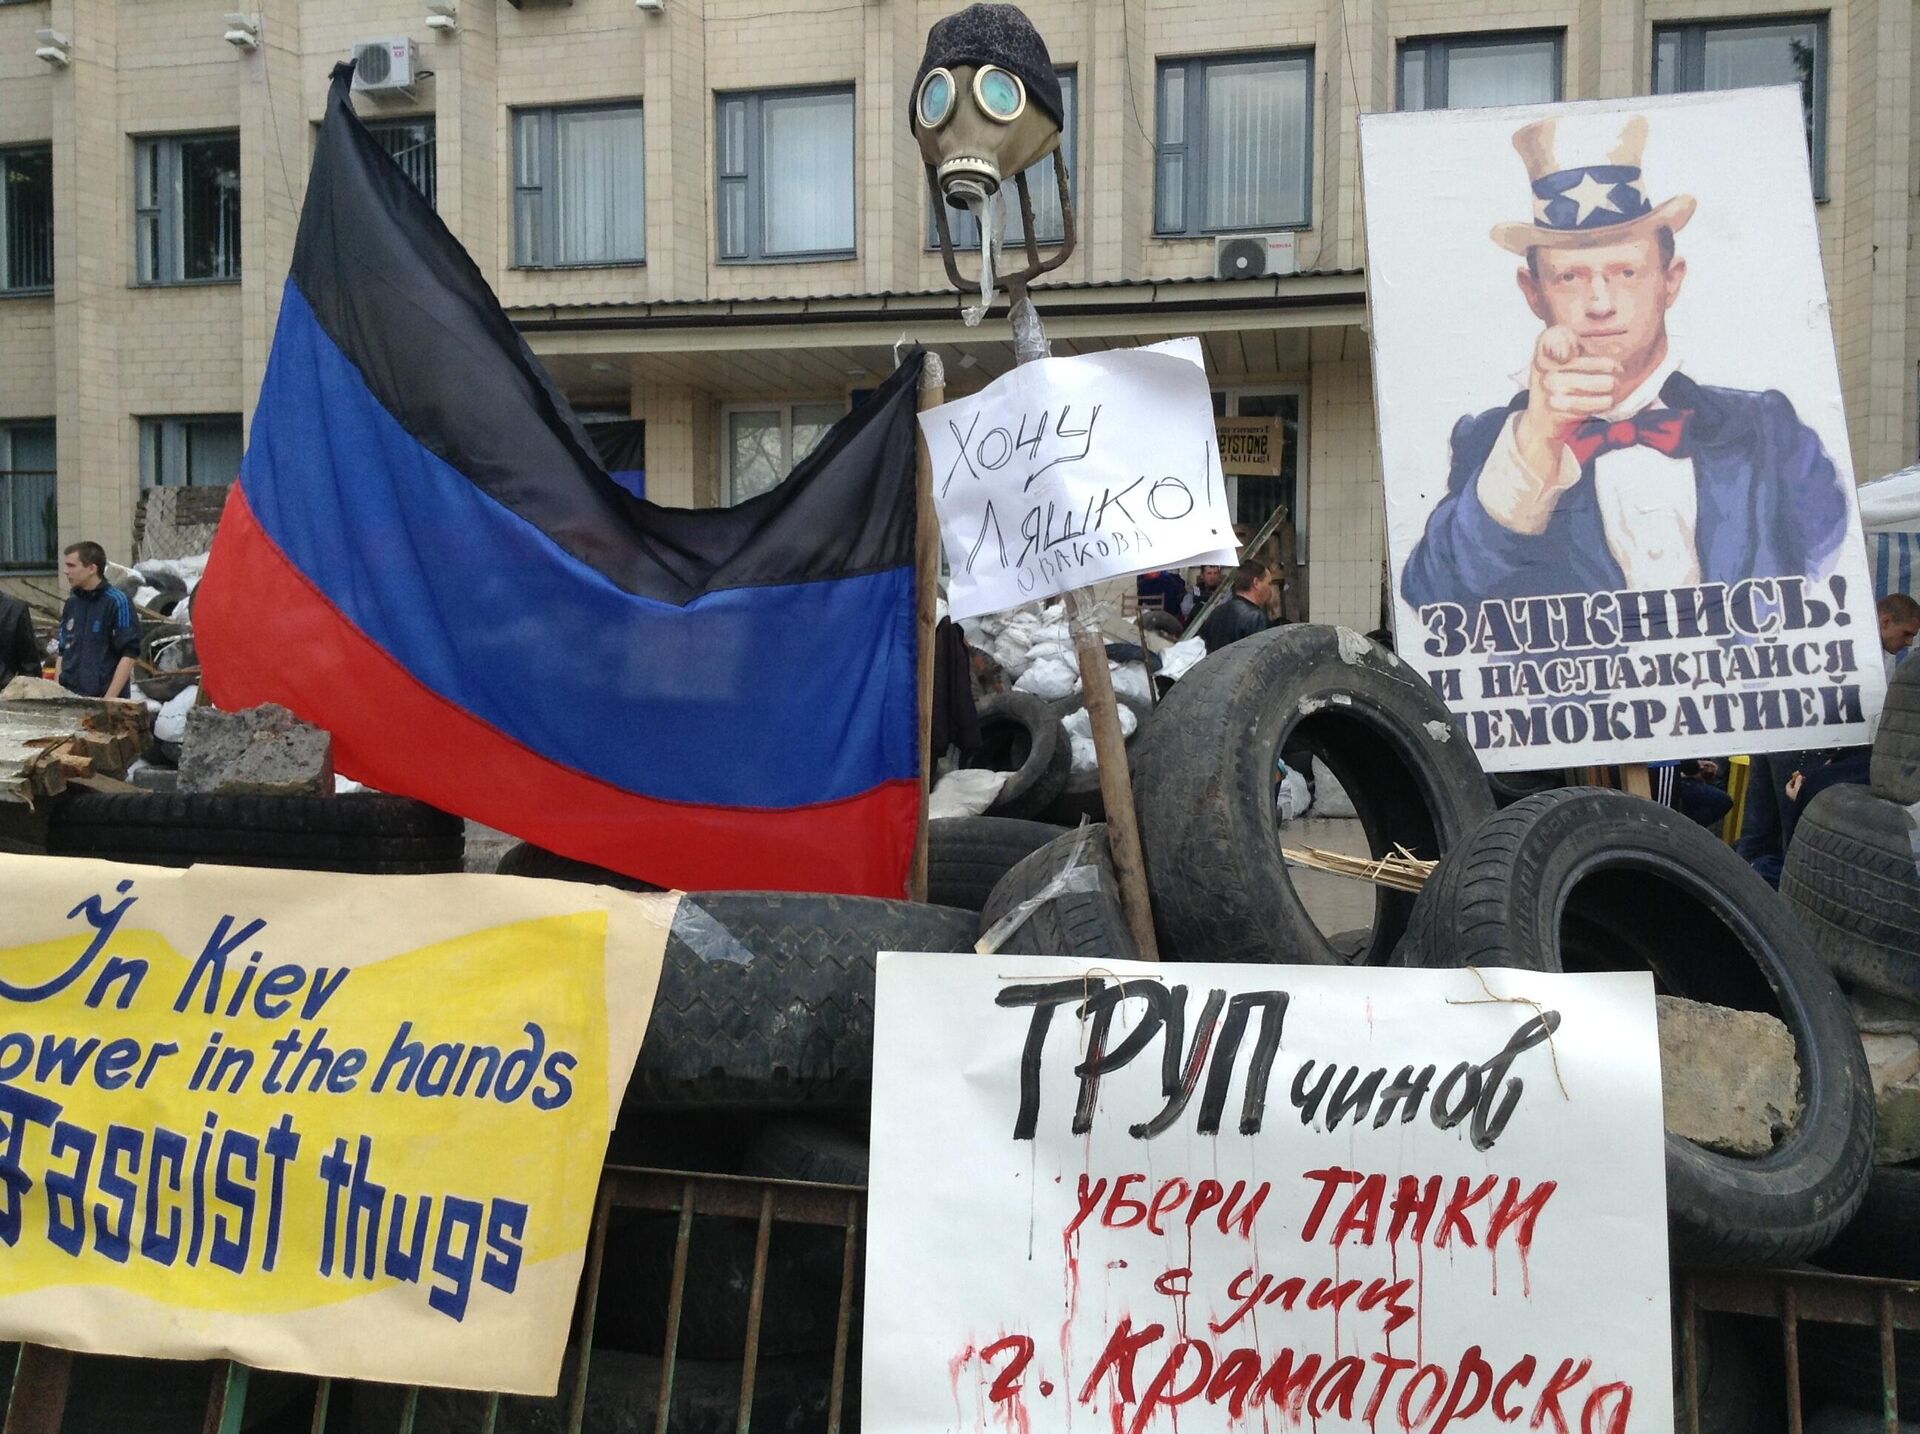 Barricades in front of the city council building in Kramatorsk, April 2014. Signs read In Kiev, power in the hands of Fascist thugs, Turchynov, take the tanks out of the streets of Kramatorsk, and Shut up! And delight in democracy. - Sputnik International, 1920, 16.04.2022